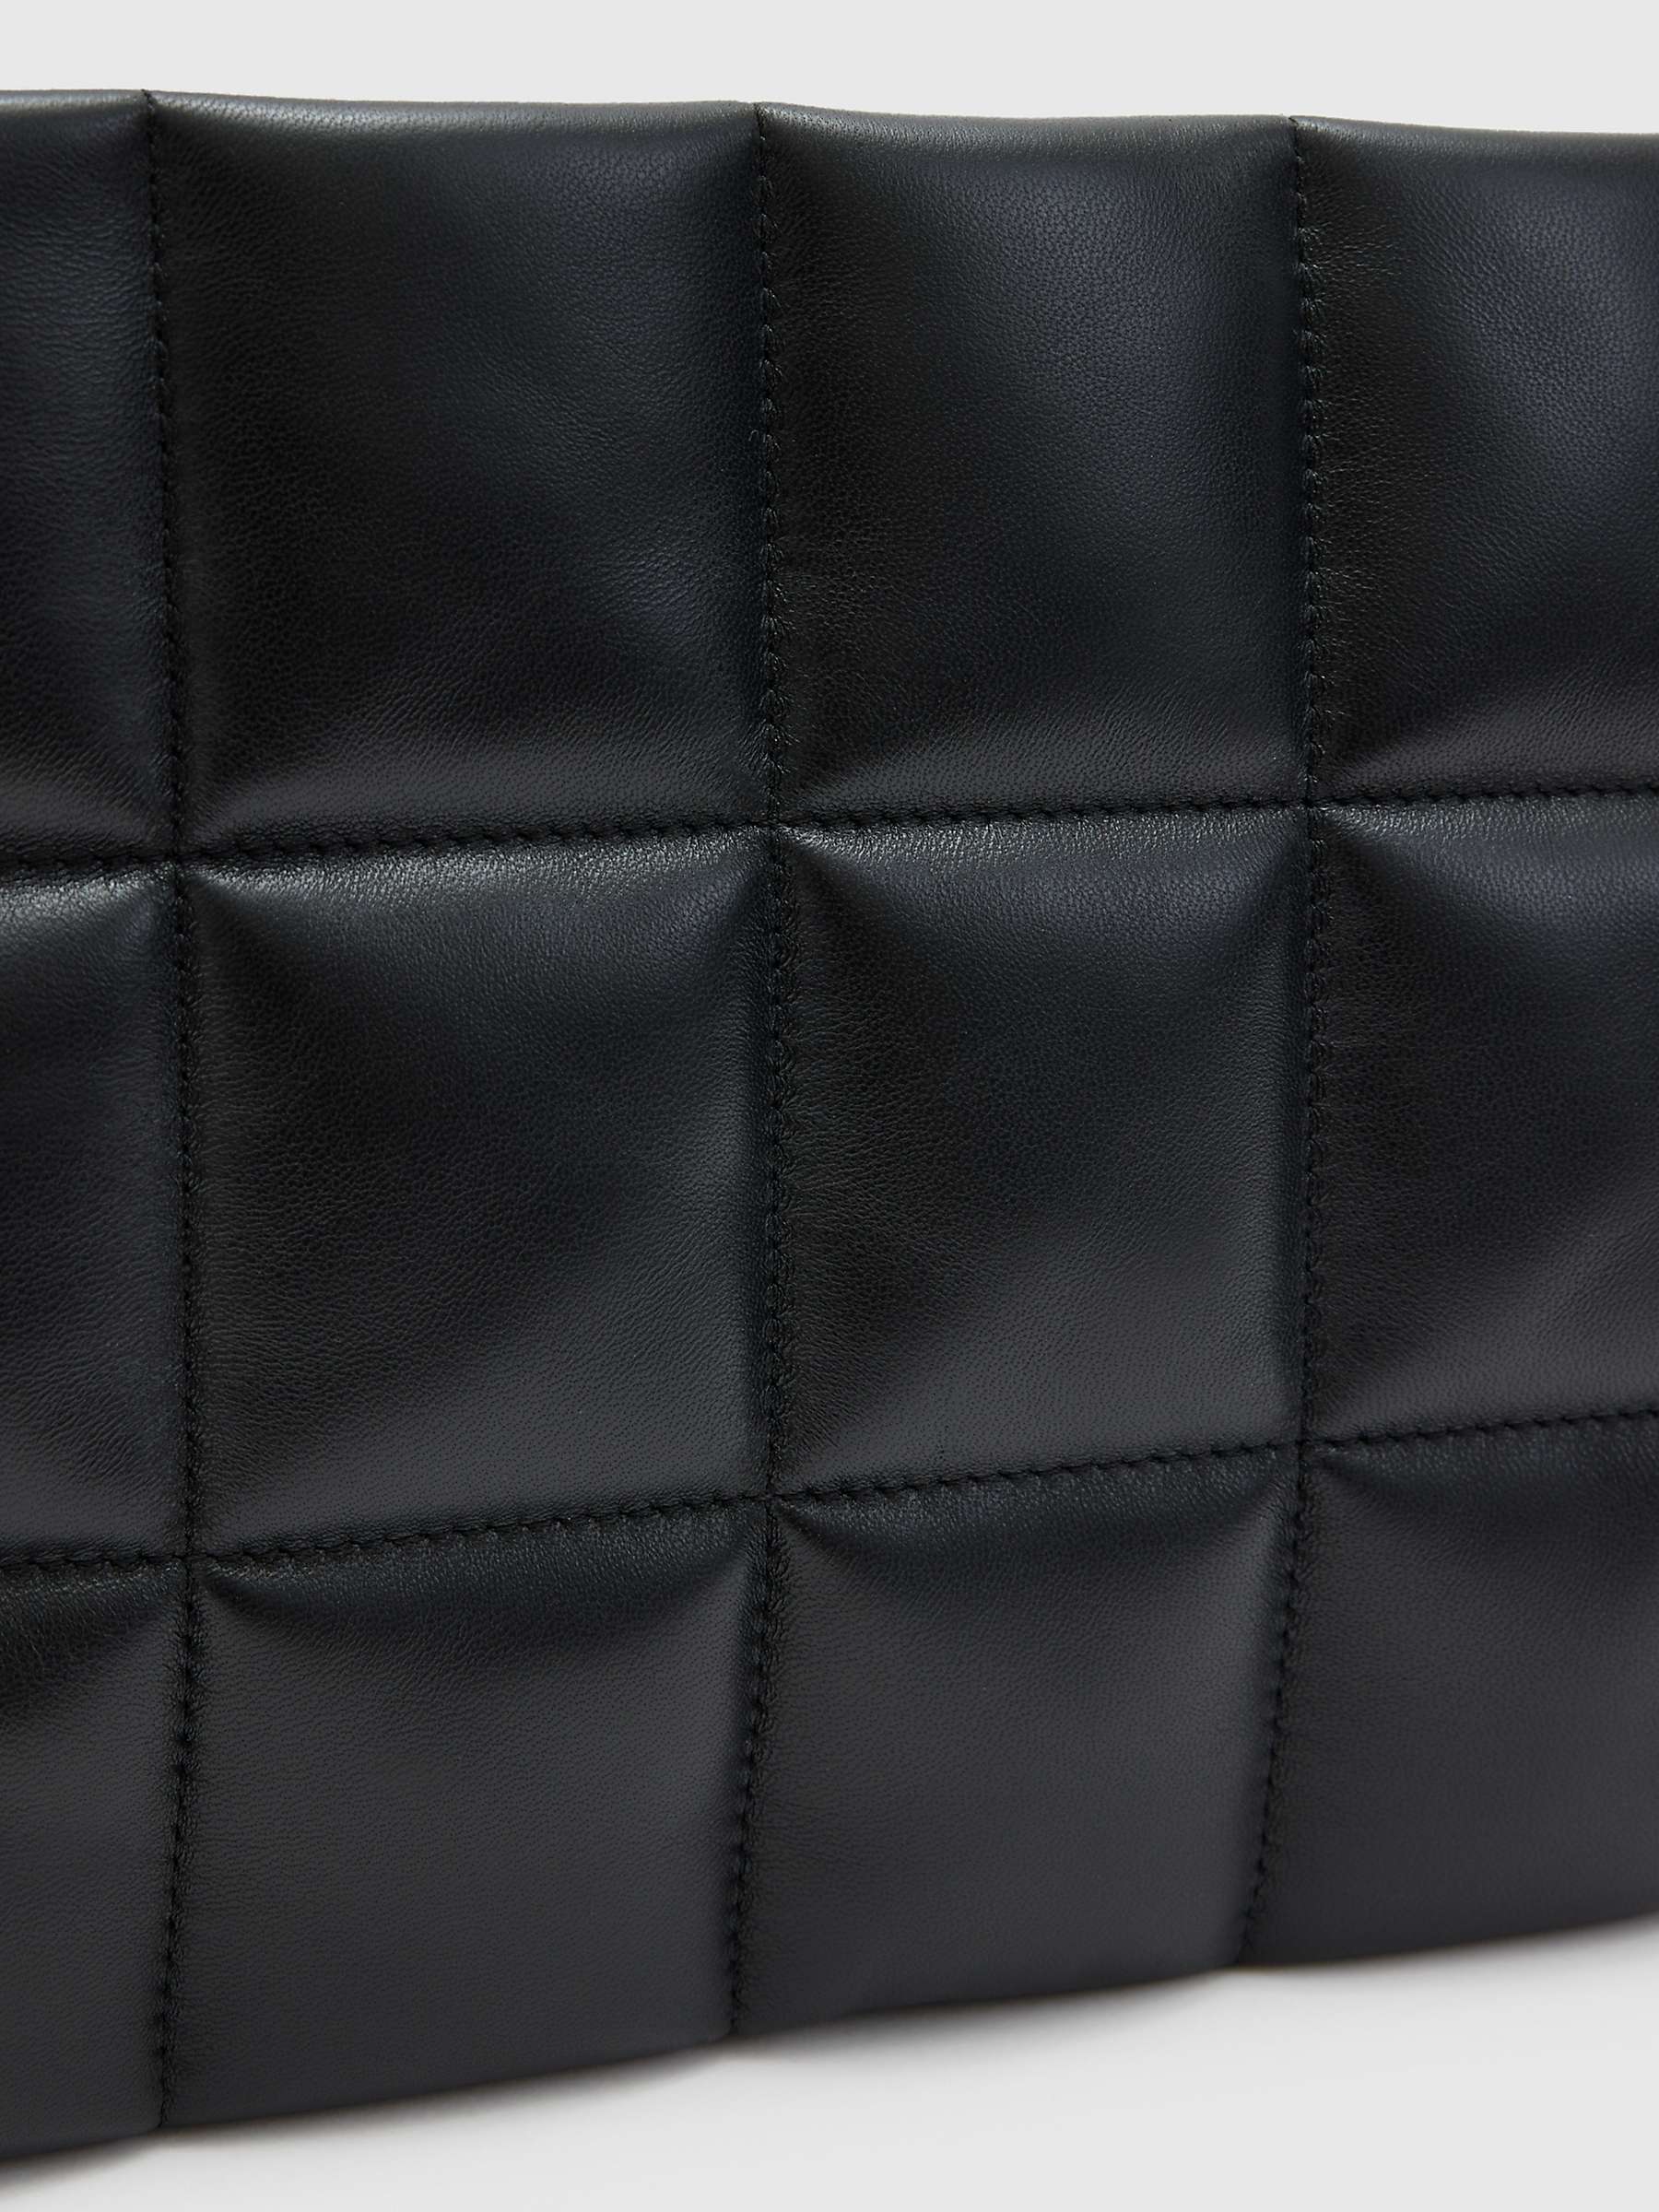 Buy AllSaints Bettina Quilted Leather Clutch Bag, Black Online at johnlewis.com